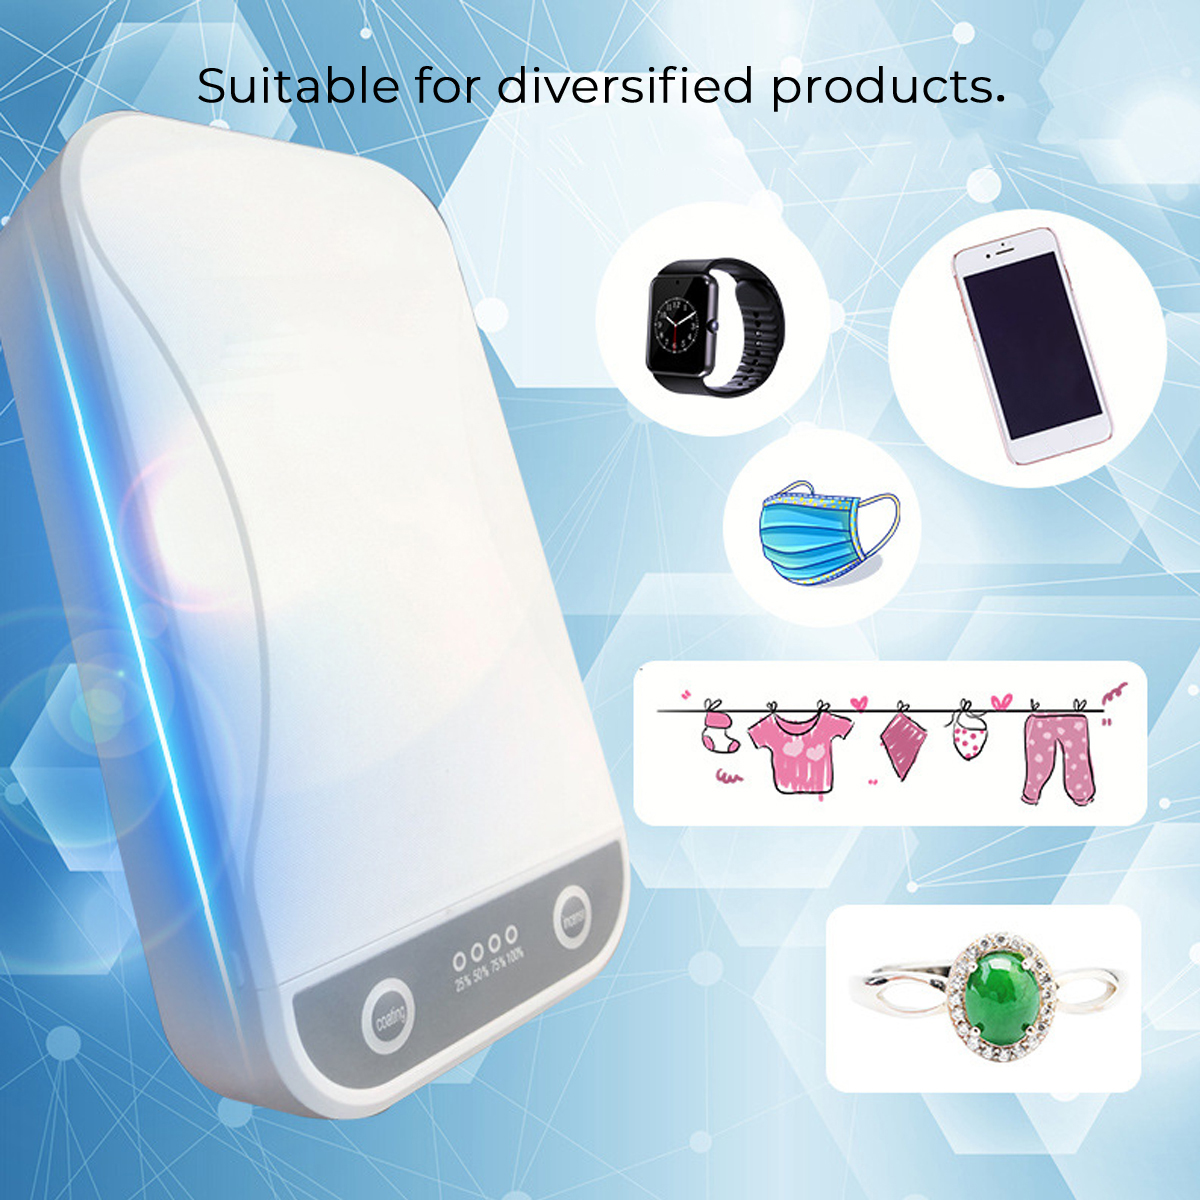 Multifunction-Double-UV-Phone-Watch-Disinfection-Sterilizer-Box-Face-Mask-Jewelry-Phones-Cleaner-wit-1658028-2